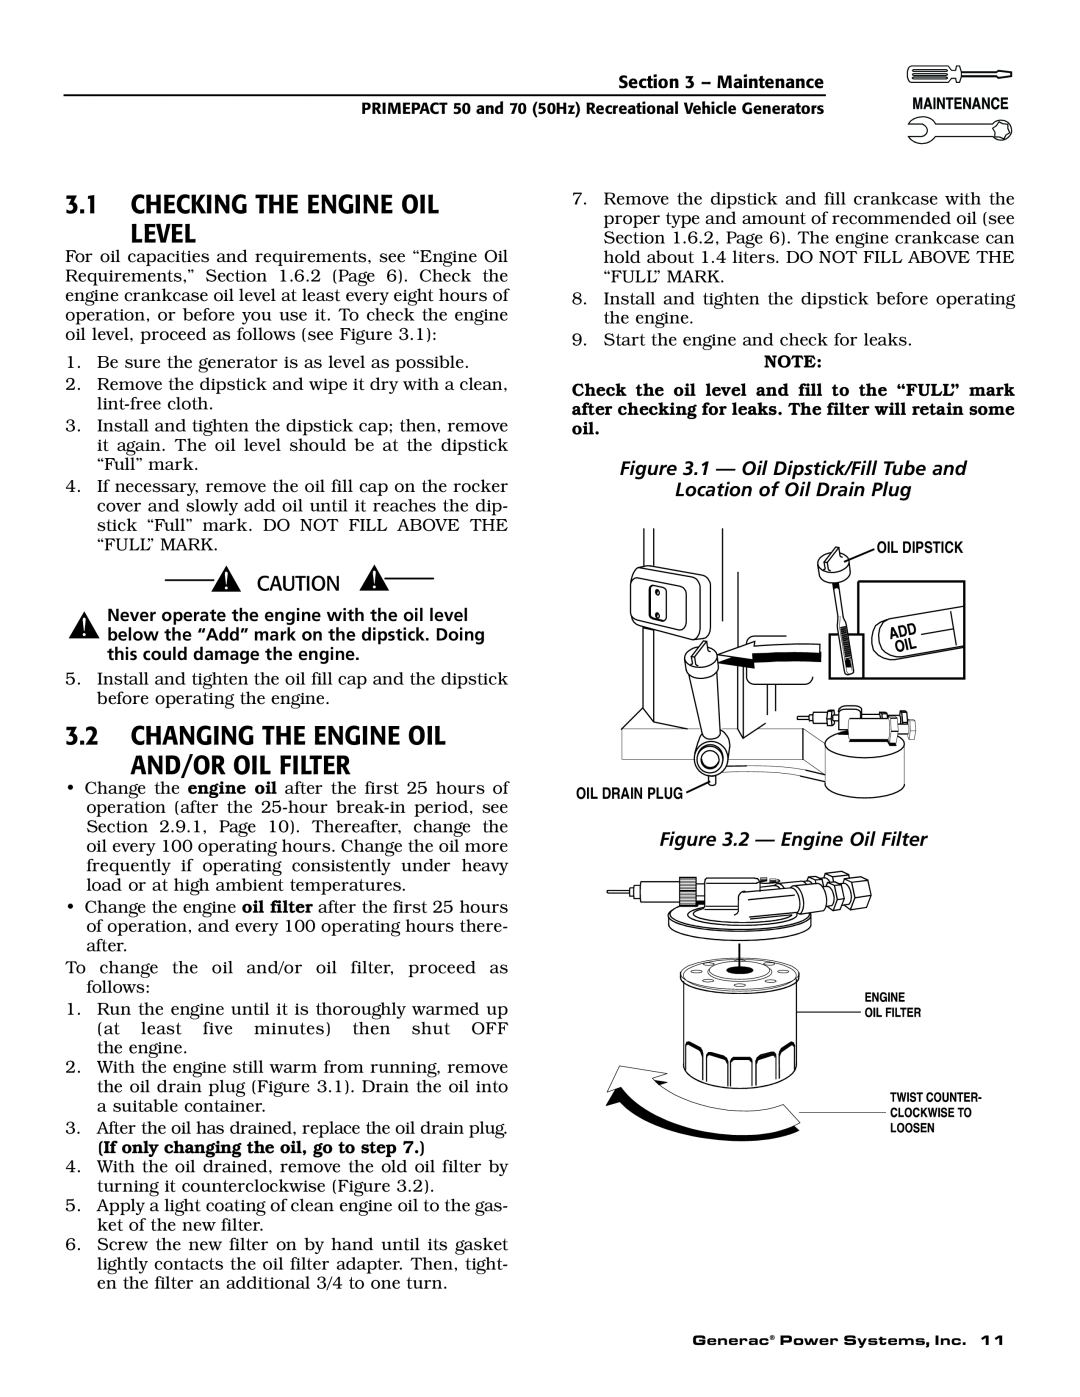 Generac 00784-2, 09290-4 Checking The Engine Oil Level, Changing The Engine Oil And/Or Oil Filter, 2 - Engine Oil Filter 